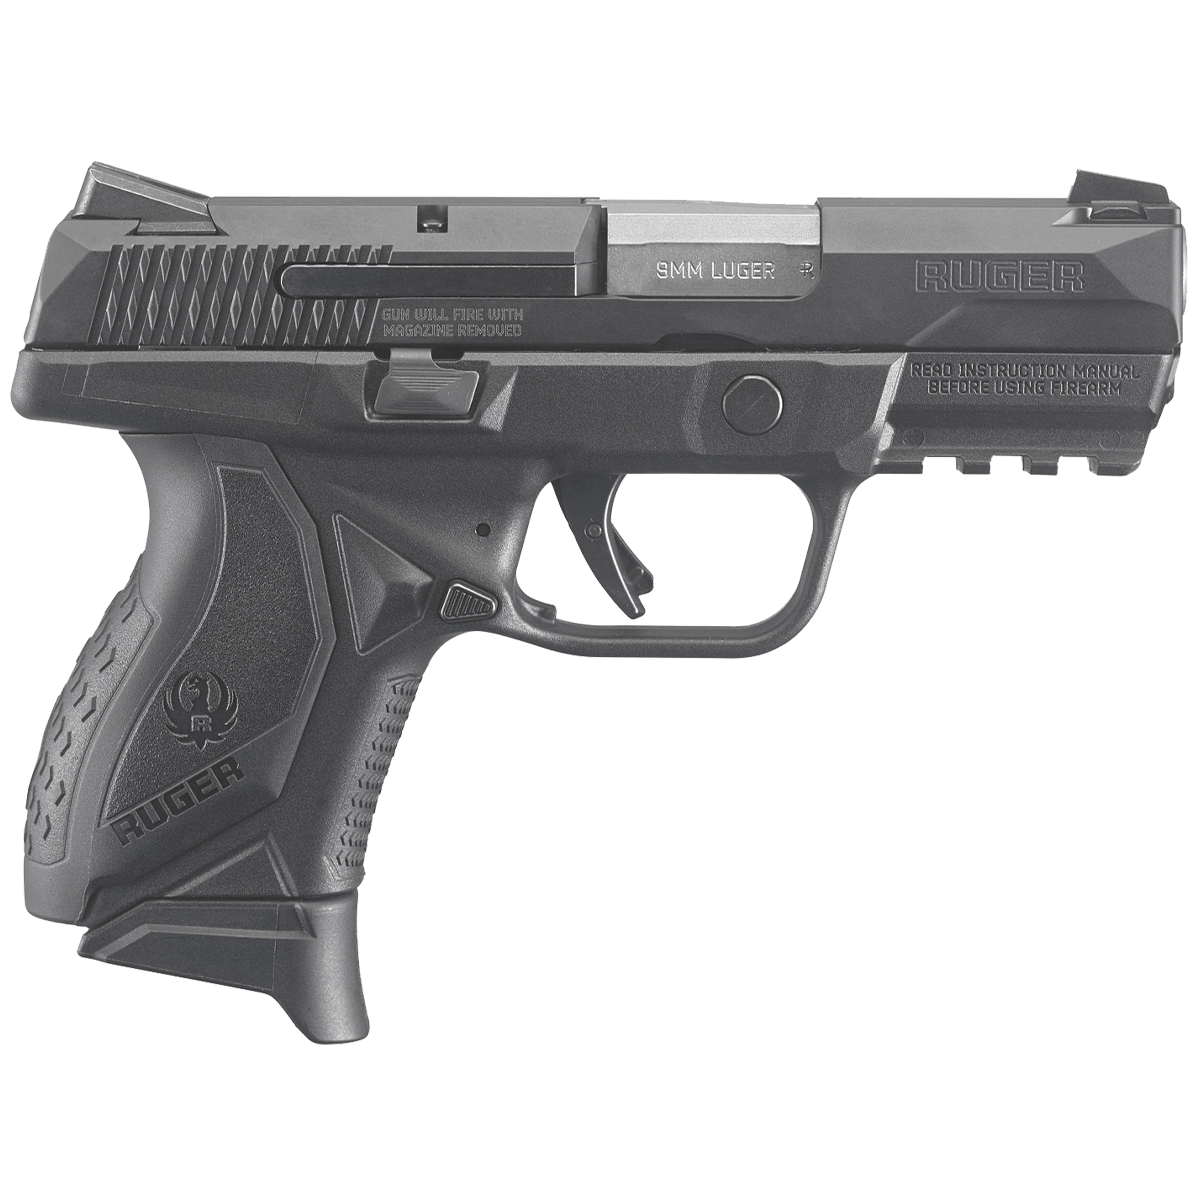 Ruger American Compact 9mm 17+1 3.55" Pistol